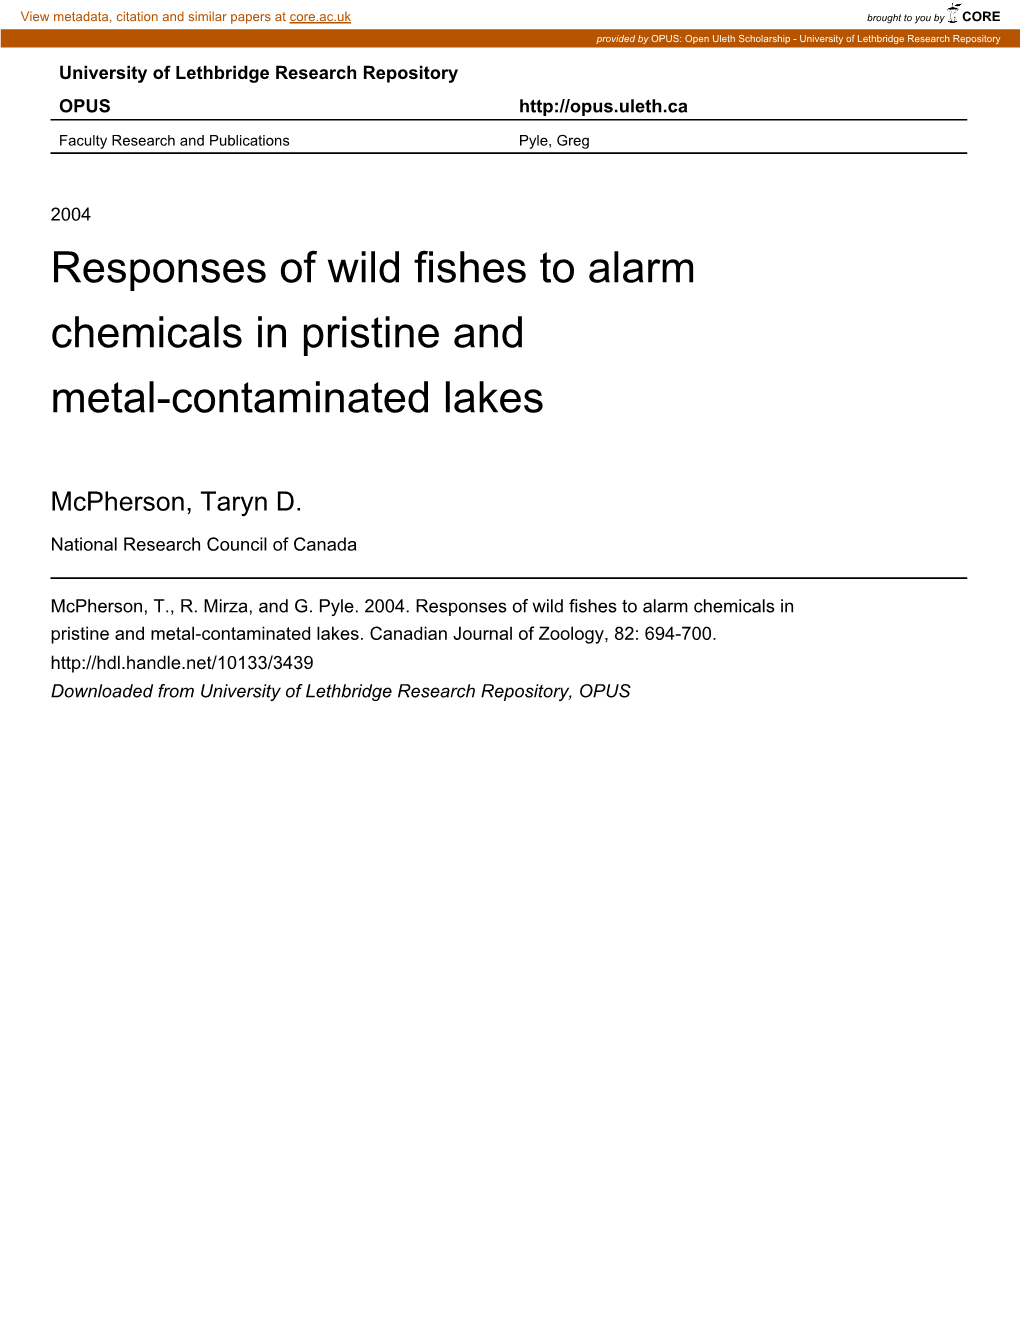 Responses of Wild Fishes to Alarm Chemicals in Pristine and Metal-Contaminated Lakes